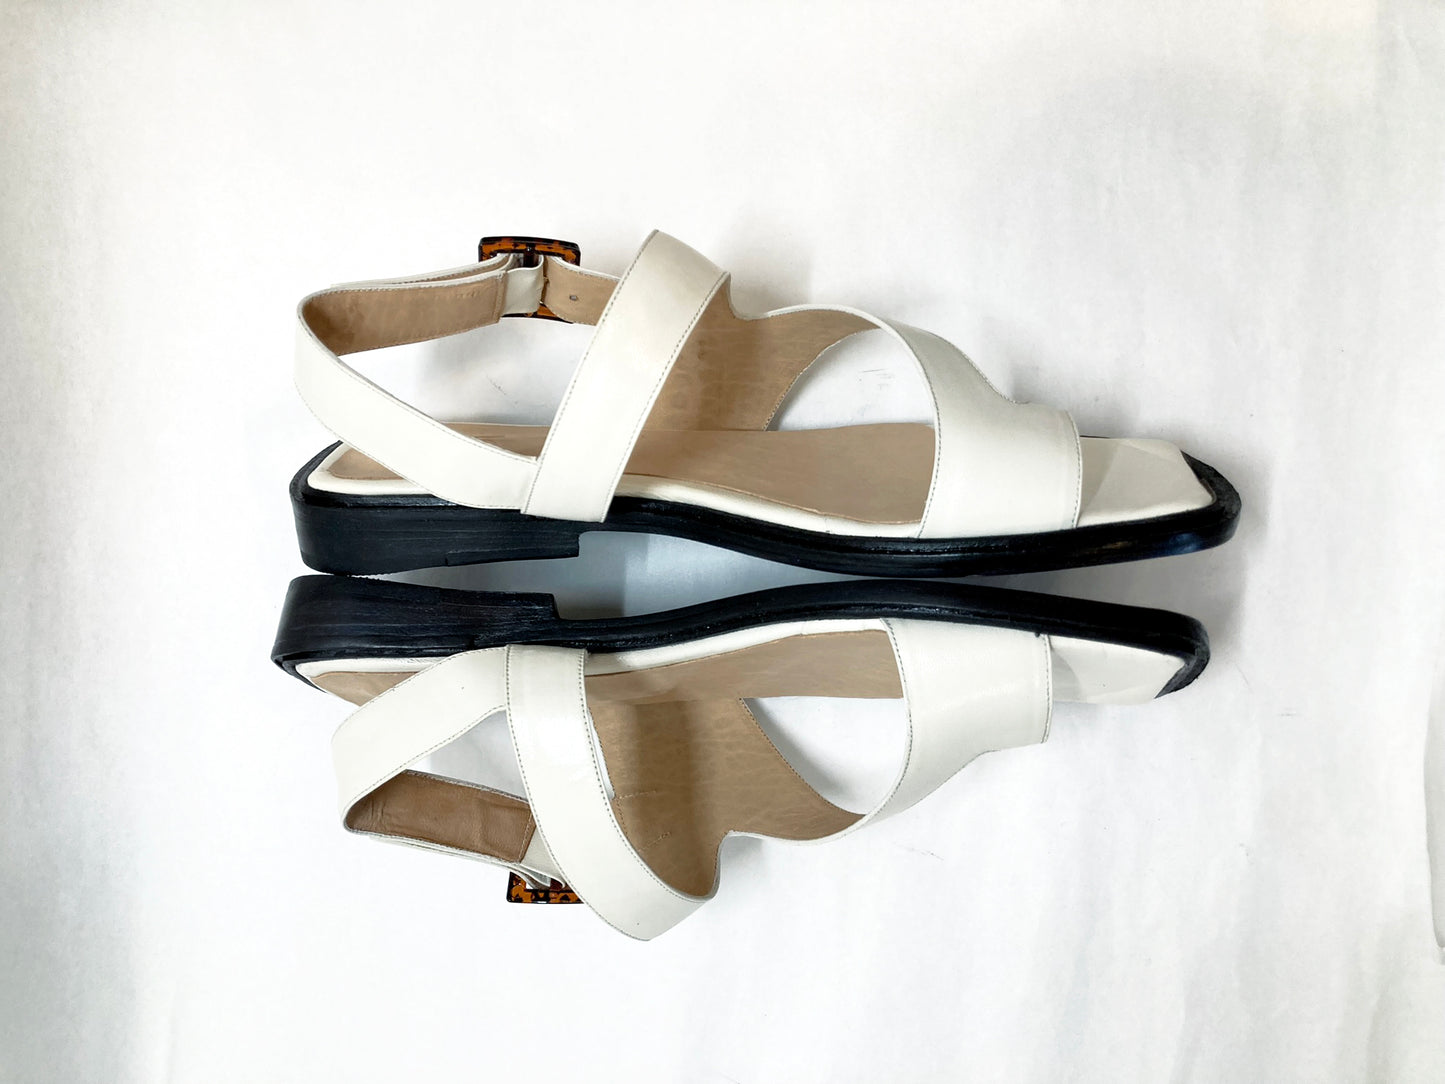 Anto Slingback in Marfil Size 38